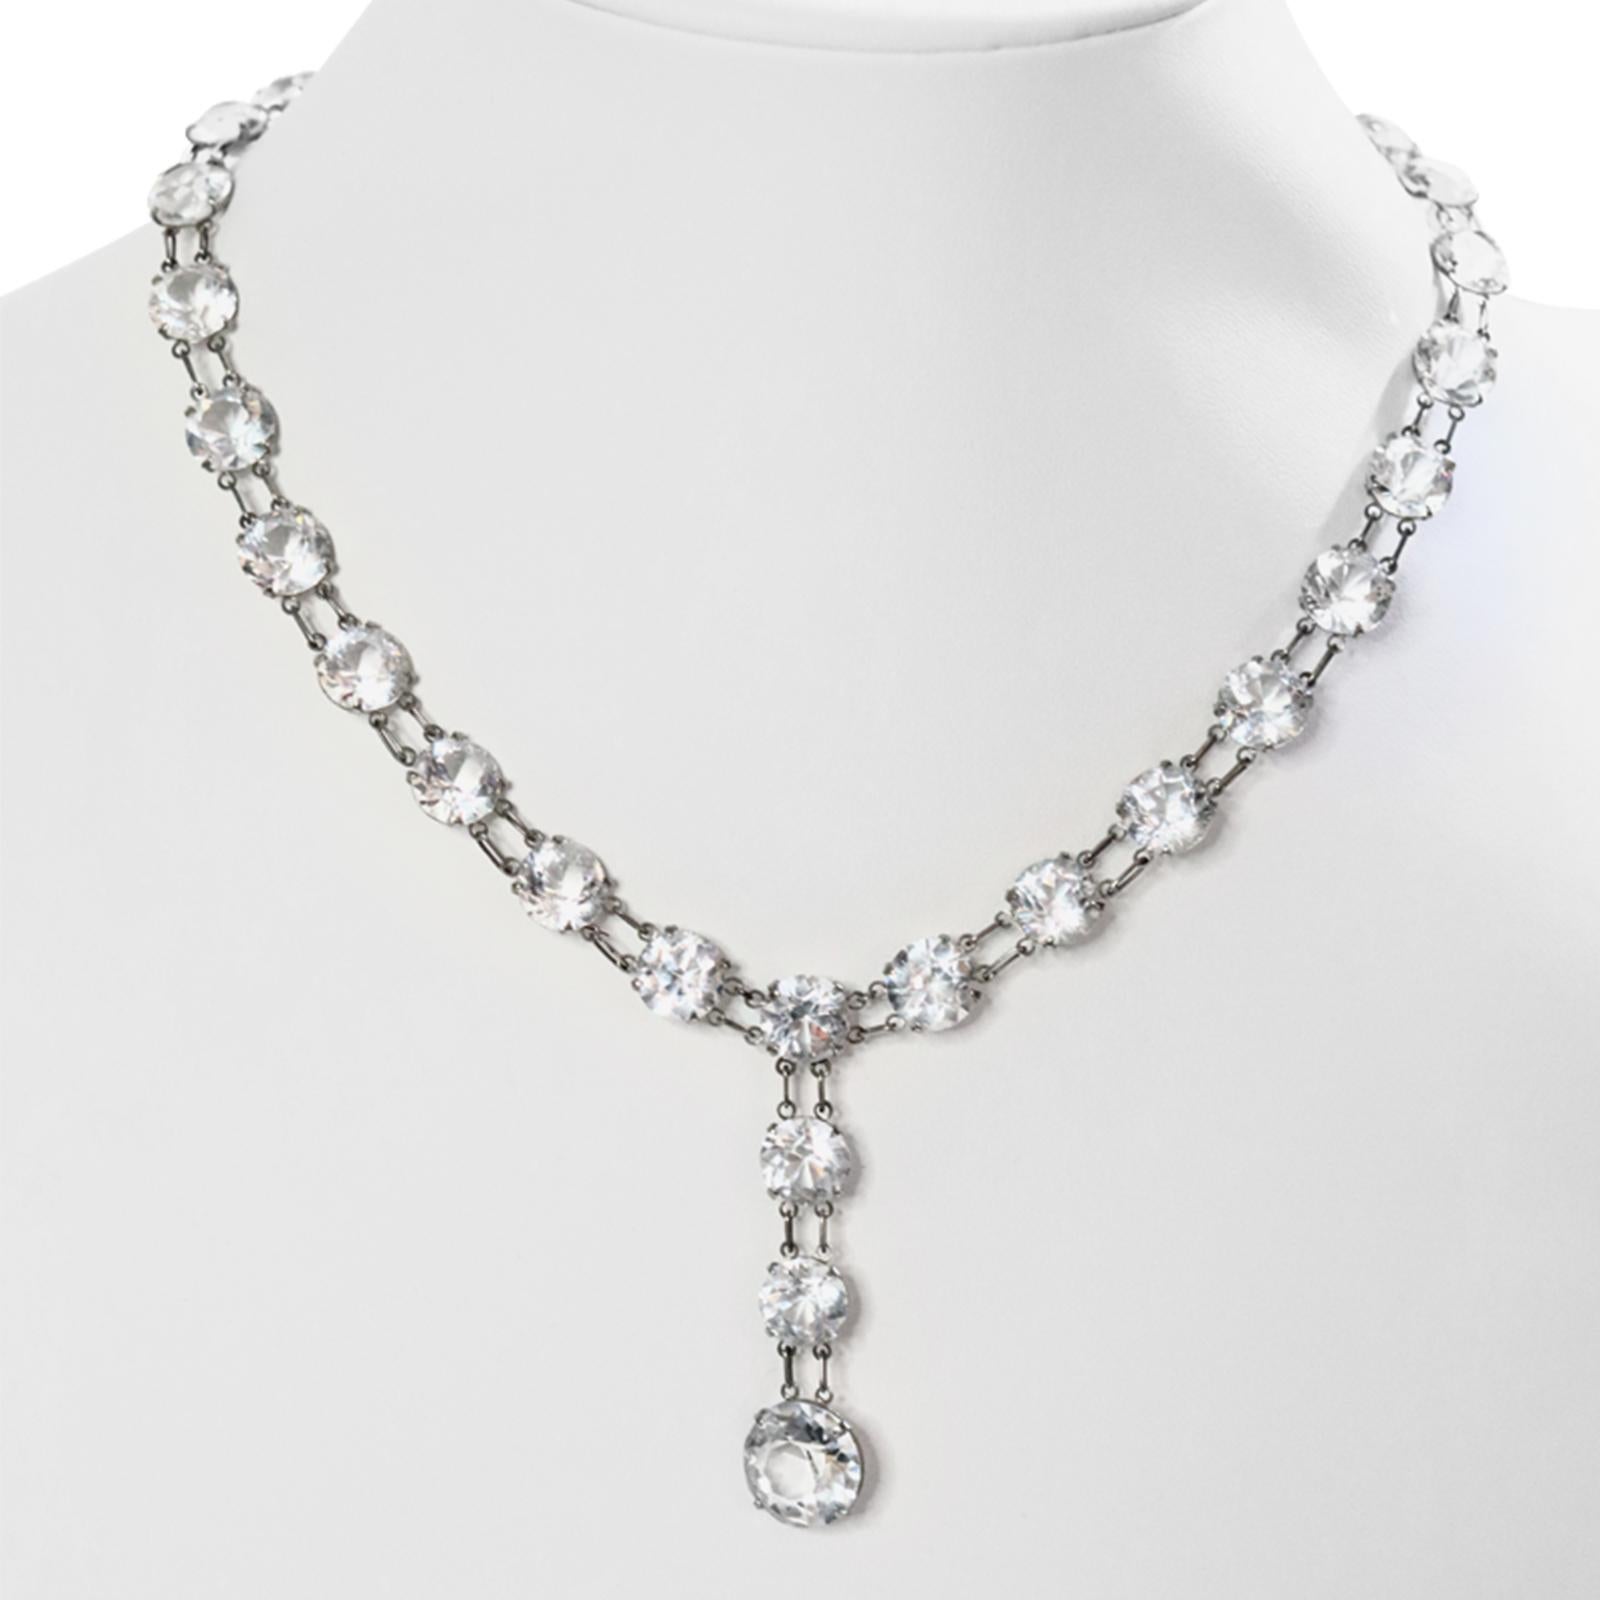 Vintage Open Back Crystal Necklace with Dangling Piece Circa 1920s For Sale 5